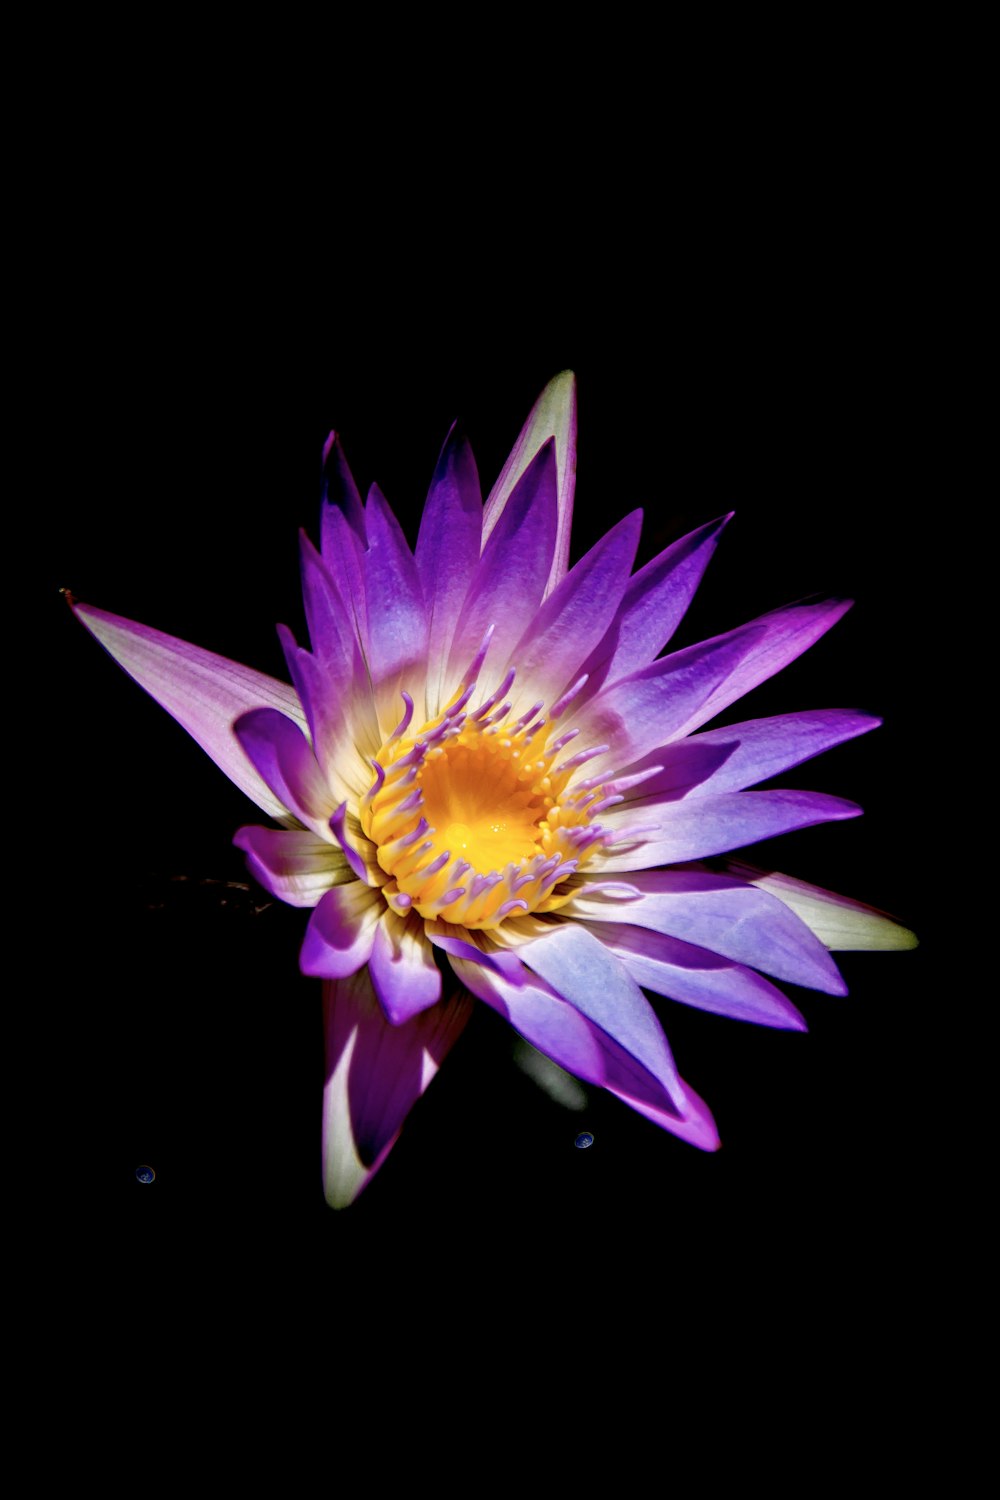 purple and yellow flower in black background